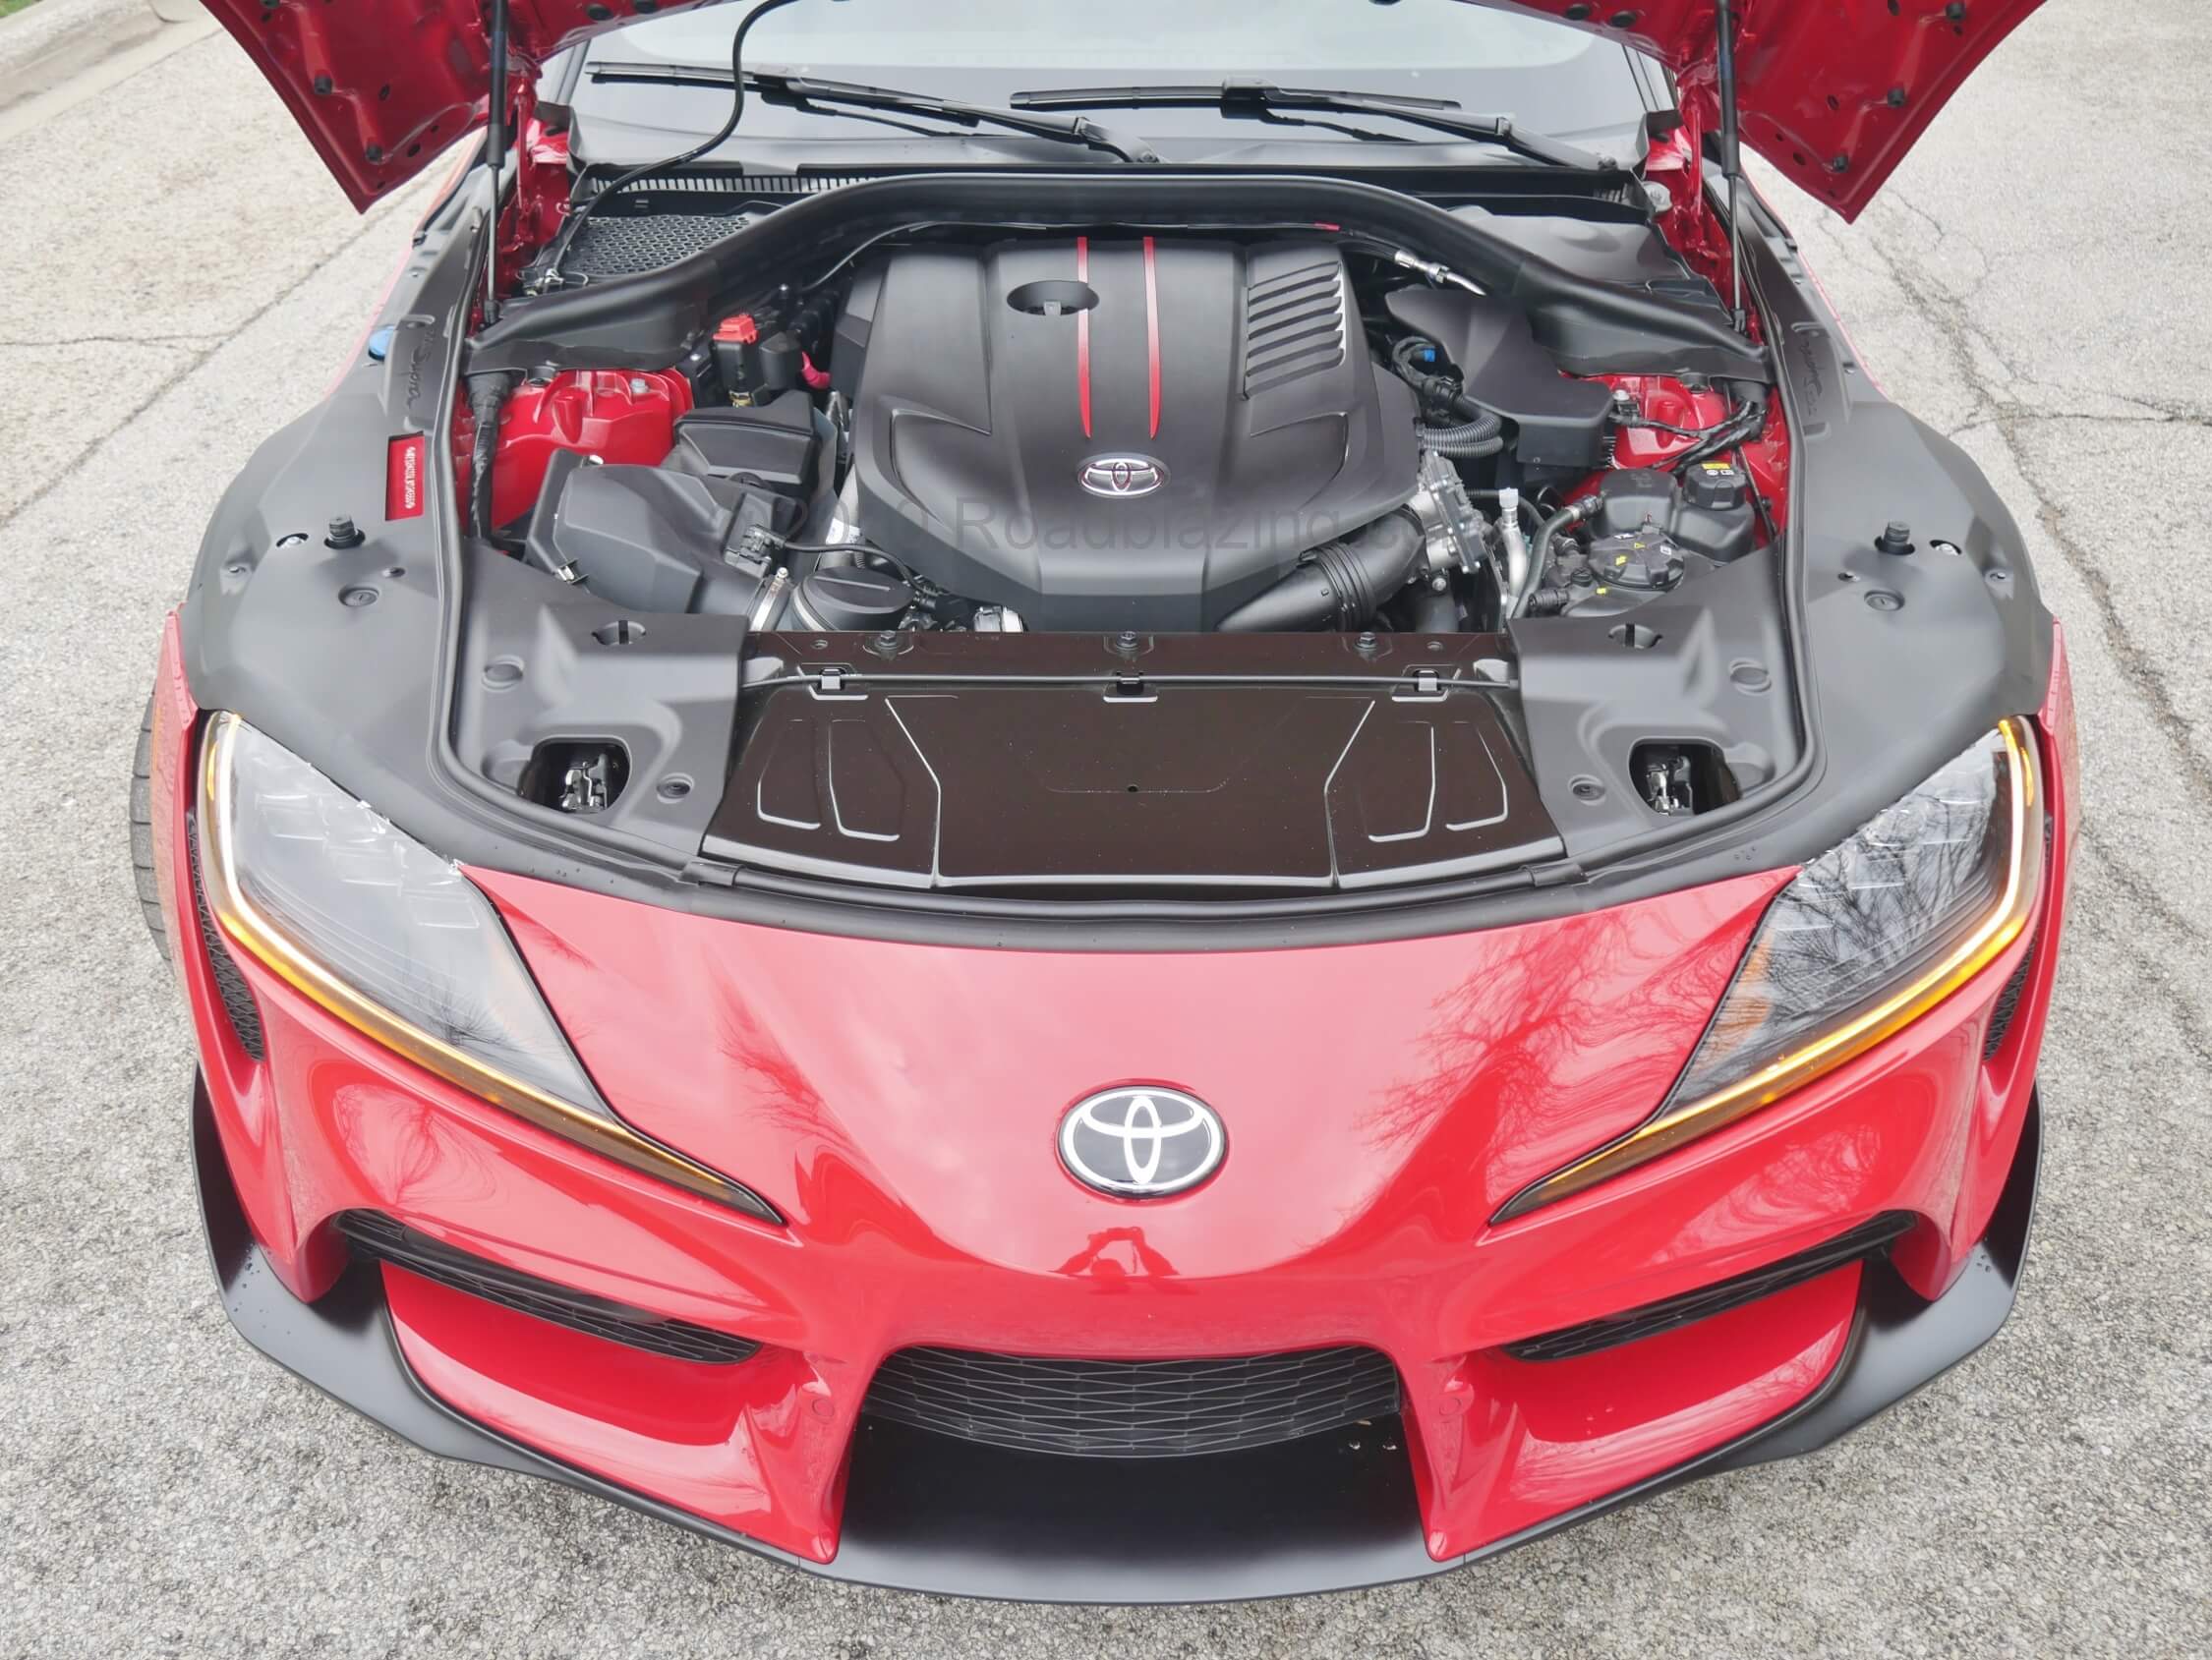 2020 Toyota Supra GR 3.0T Premium: Underrated 335 hp / 365 lb-ft @1600 rpm + 8-speed ZF planetary manumatic transmission + e-limited slip differential + launch control = sub 4.0 sec 0-60 mph launches